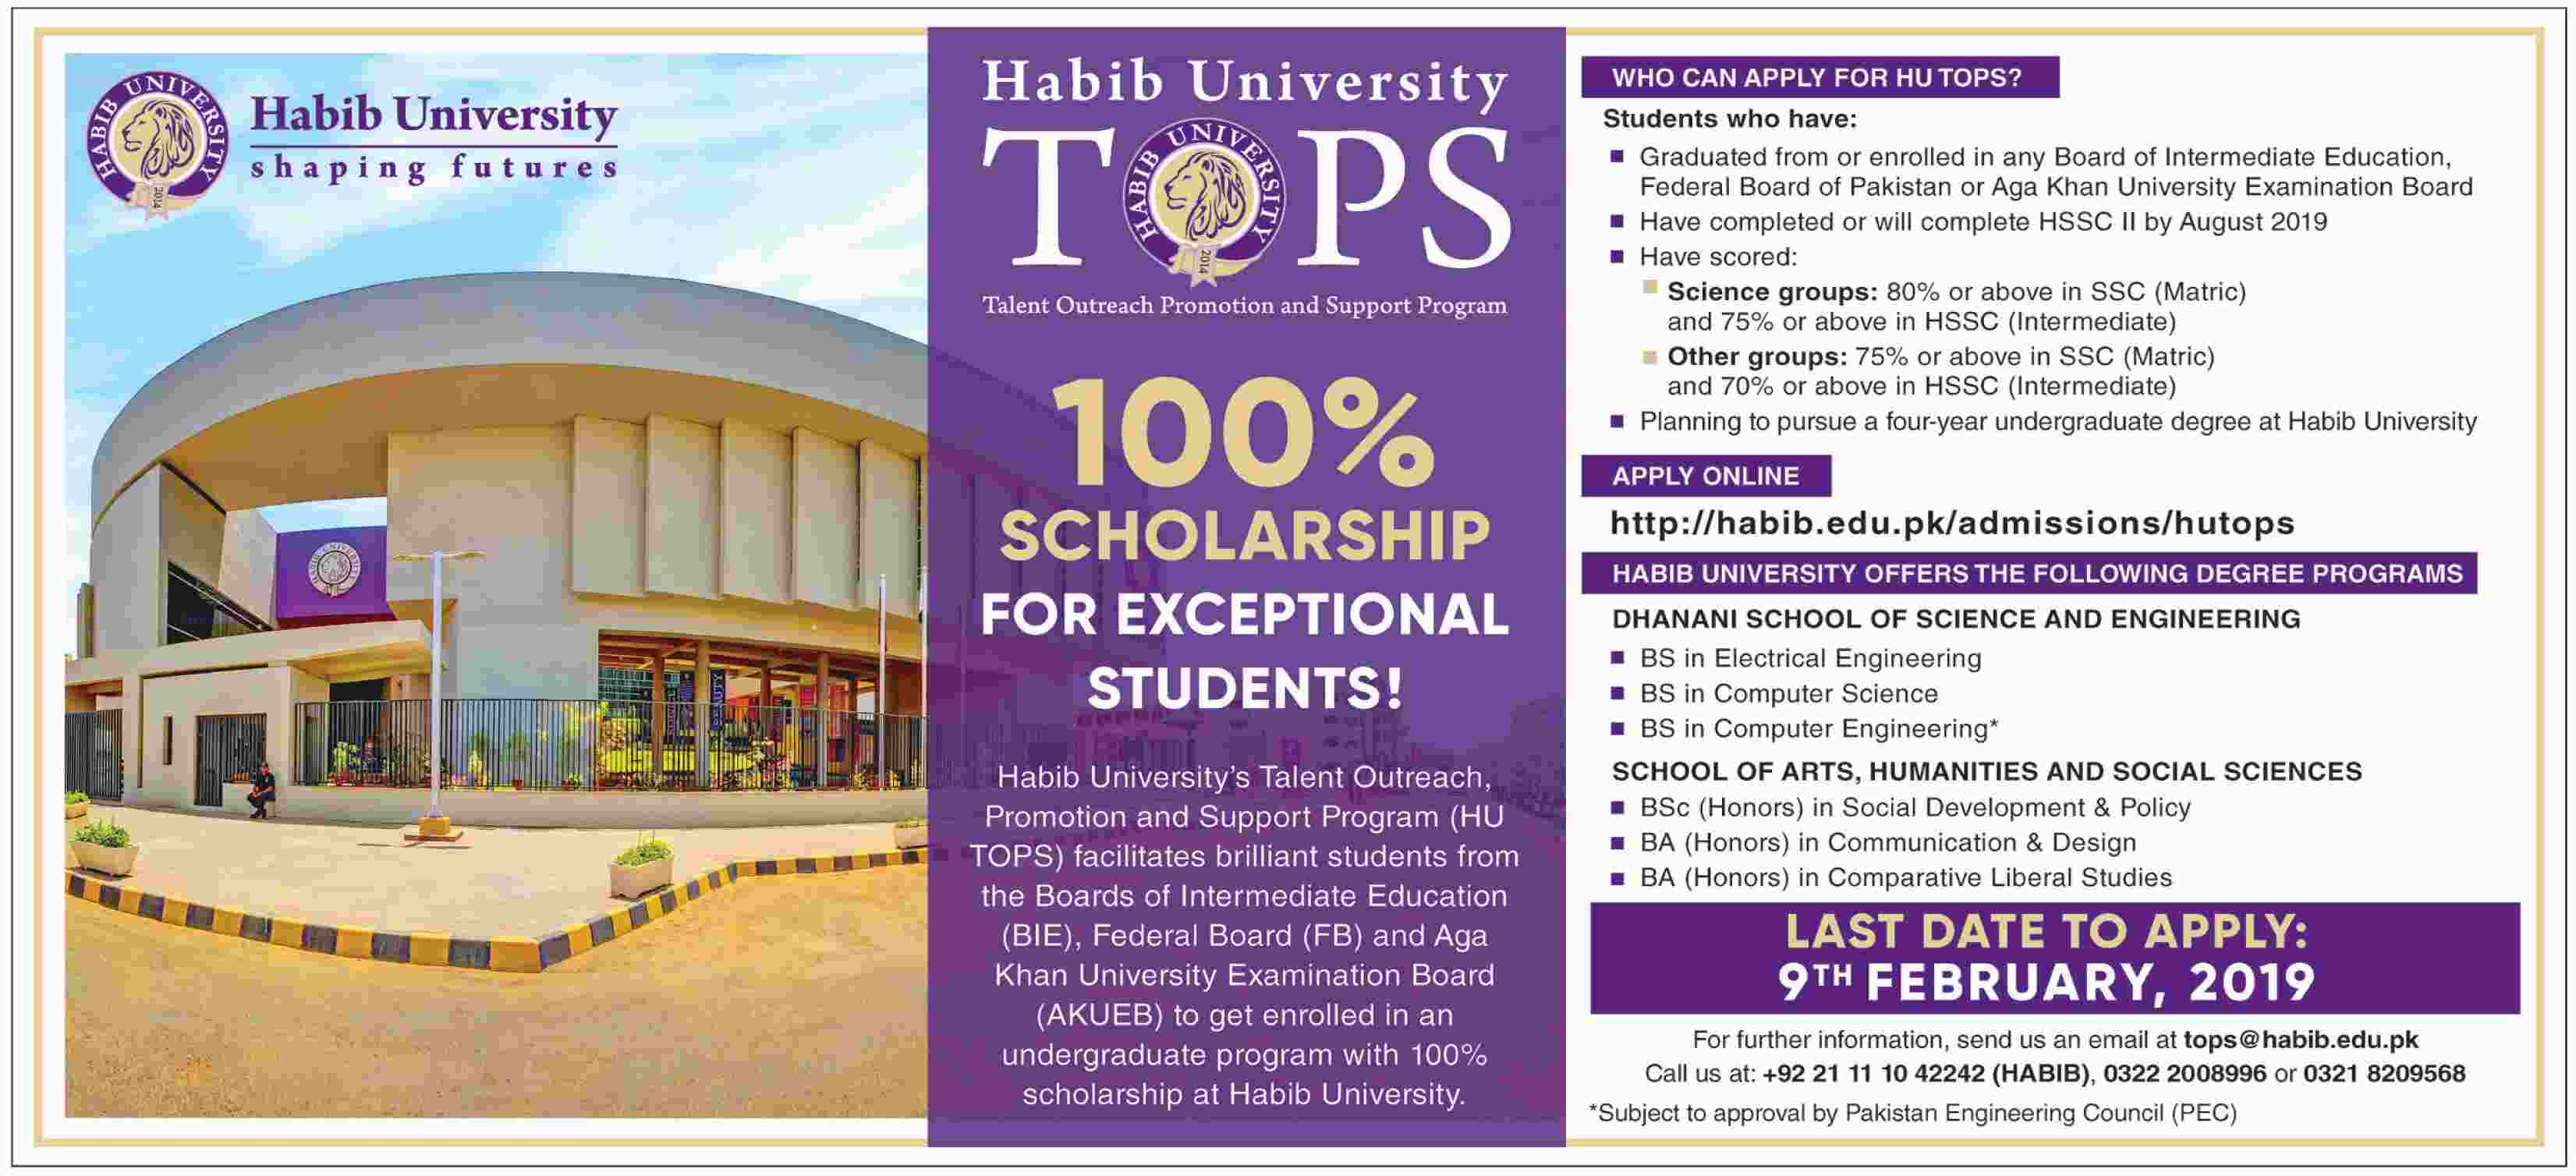 100% Scholarship for Exceptional Students - Habib University's Talent Outreach, Promotion and Support Program